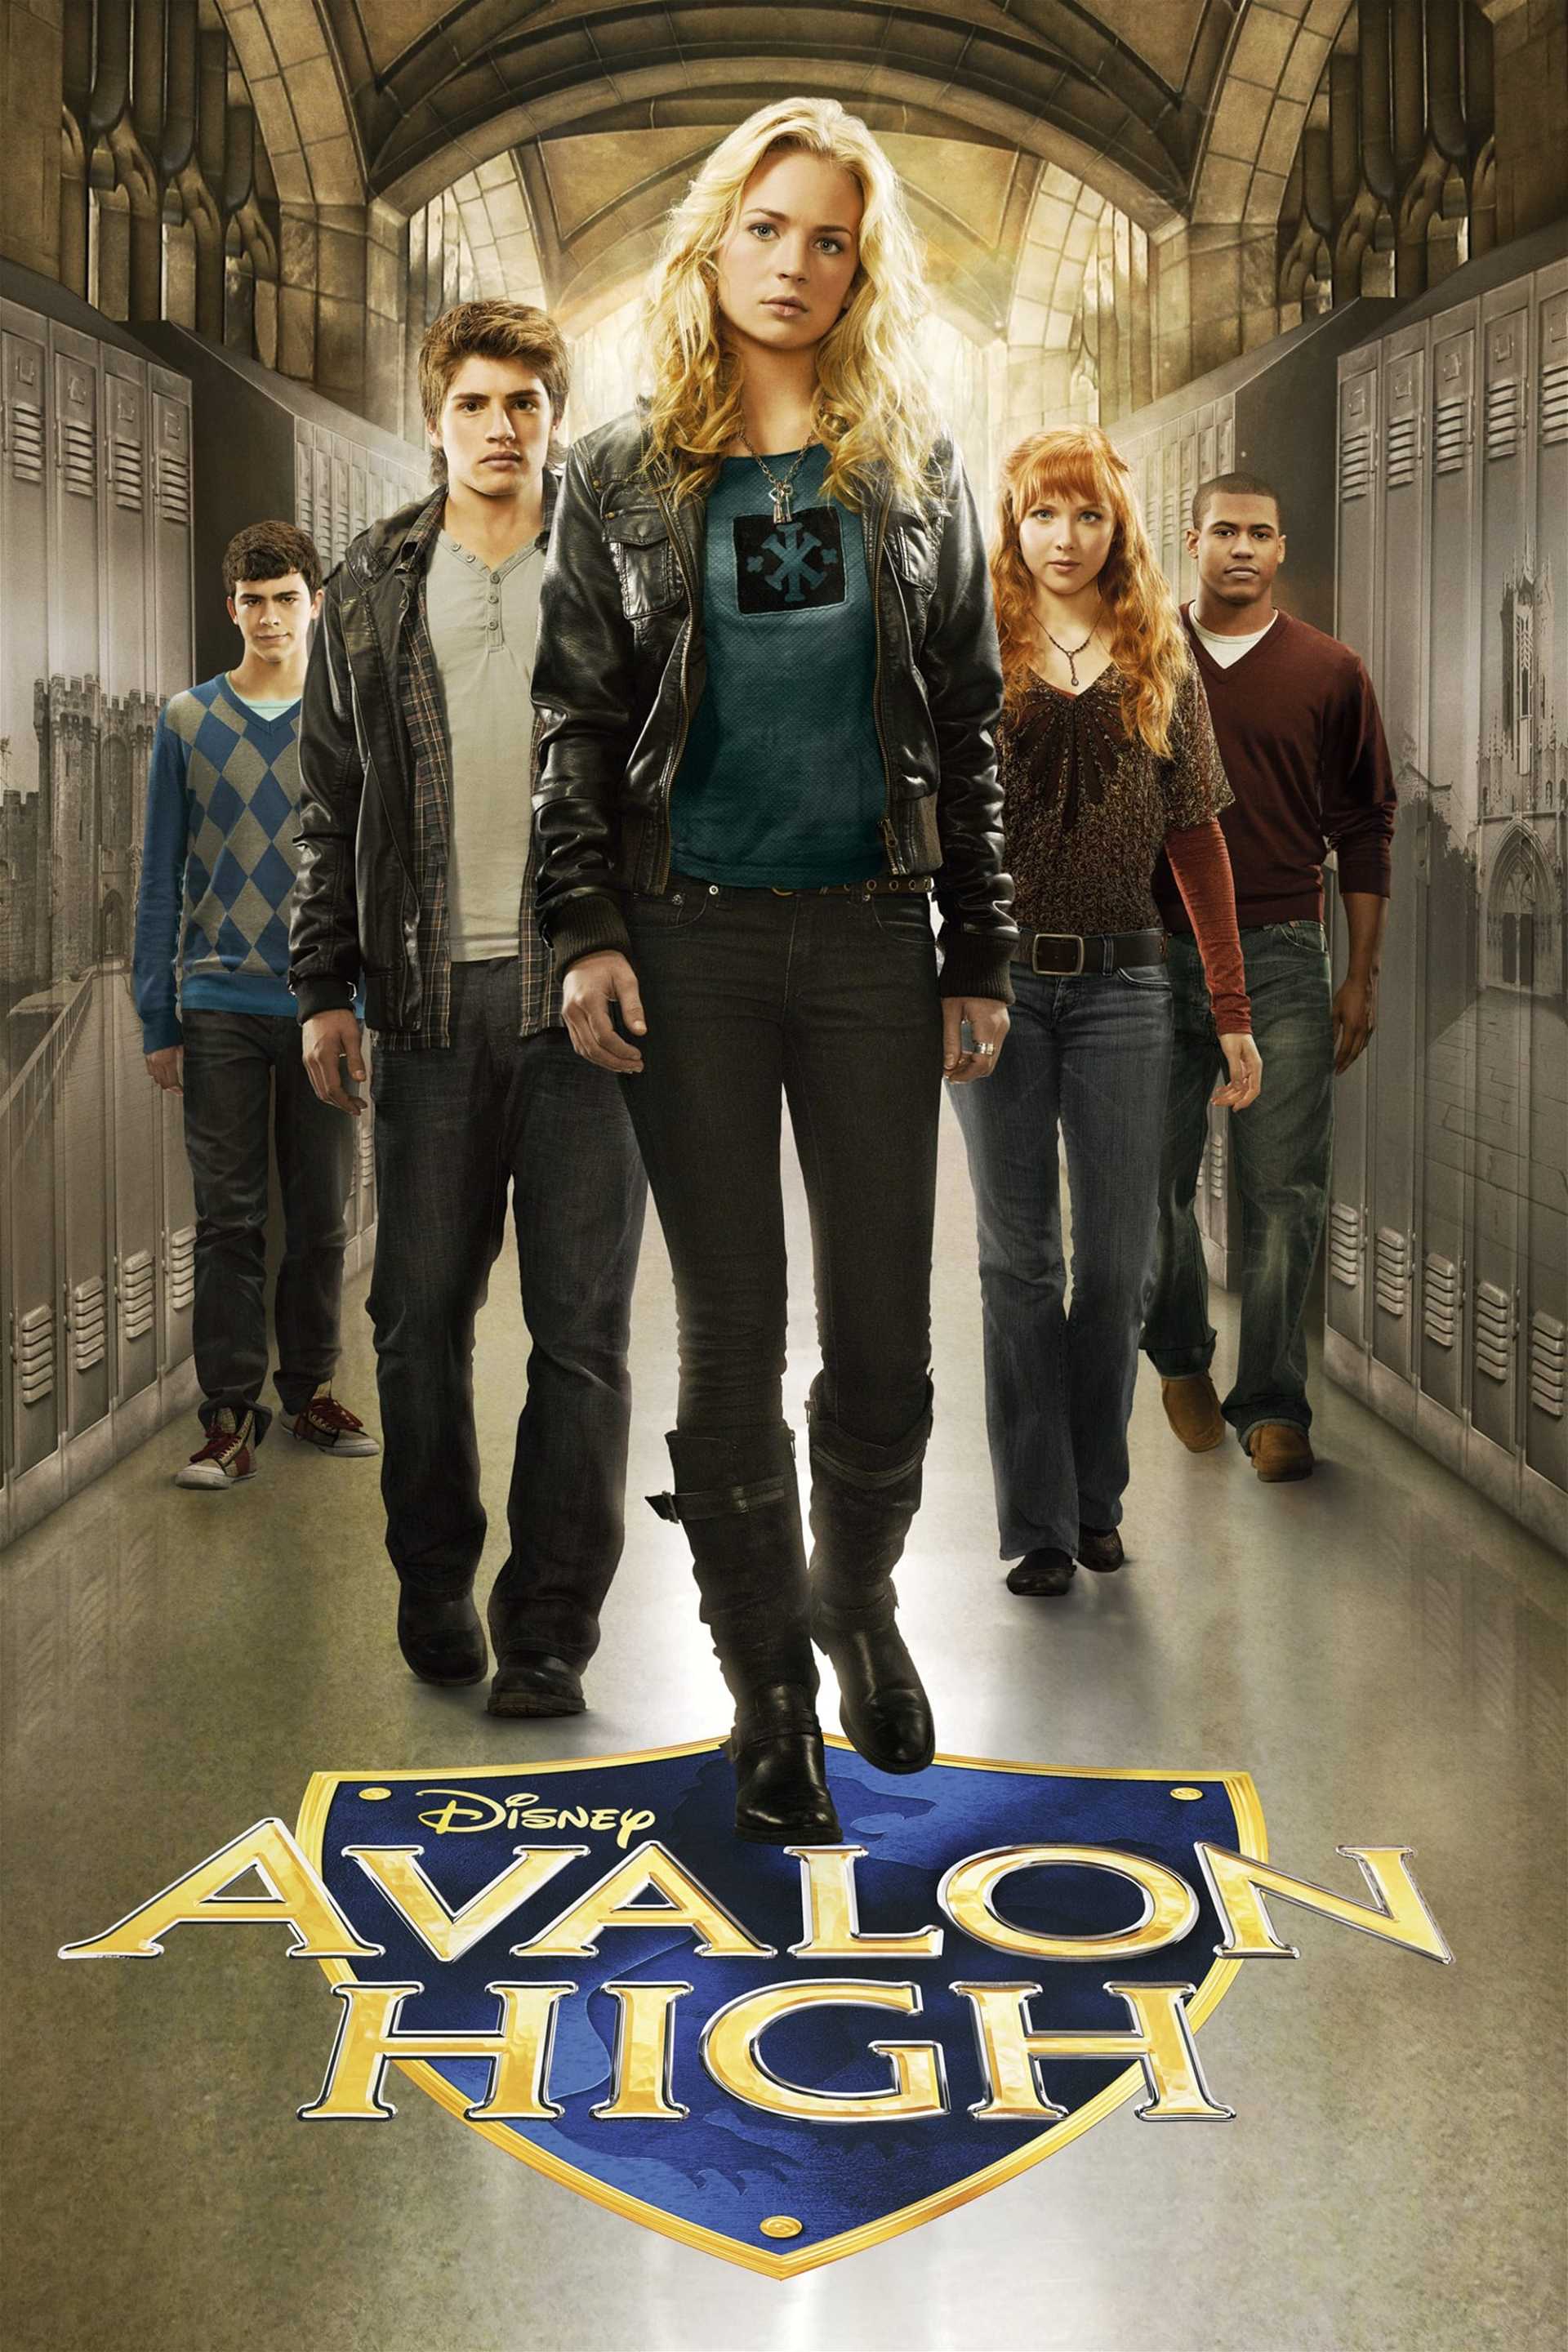 Avalon High in streaming